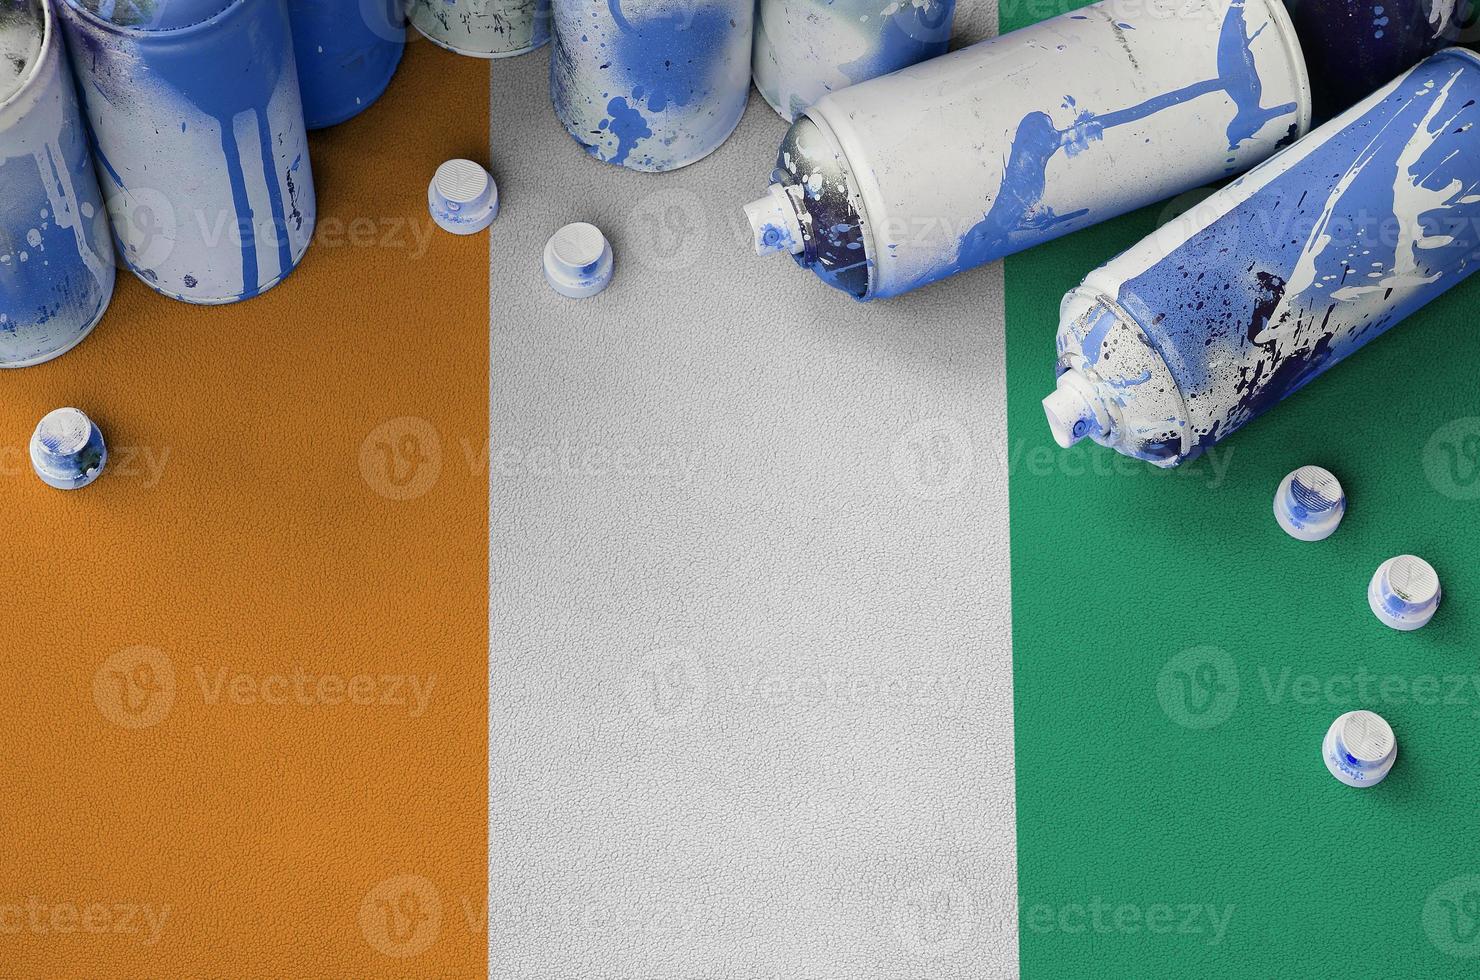 Ivory Coast flag and few used aerosol spray cans for graffiti painting. Street art culture concept photo